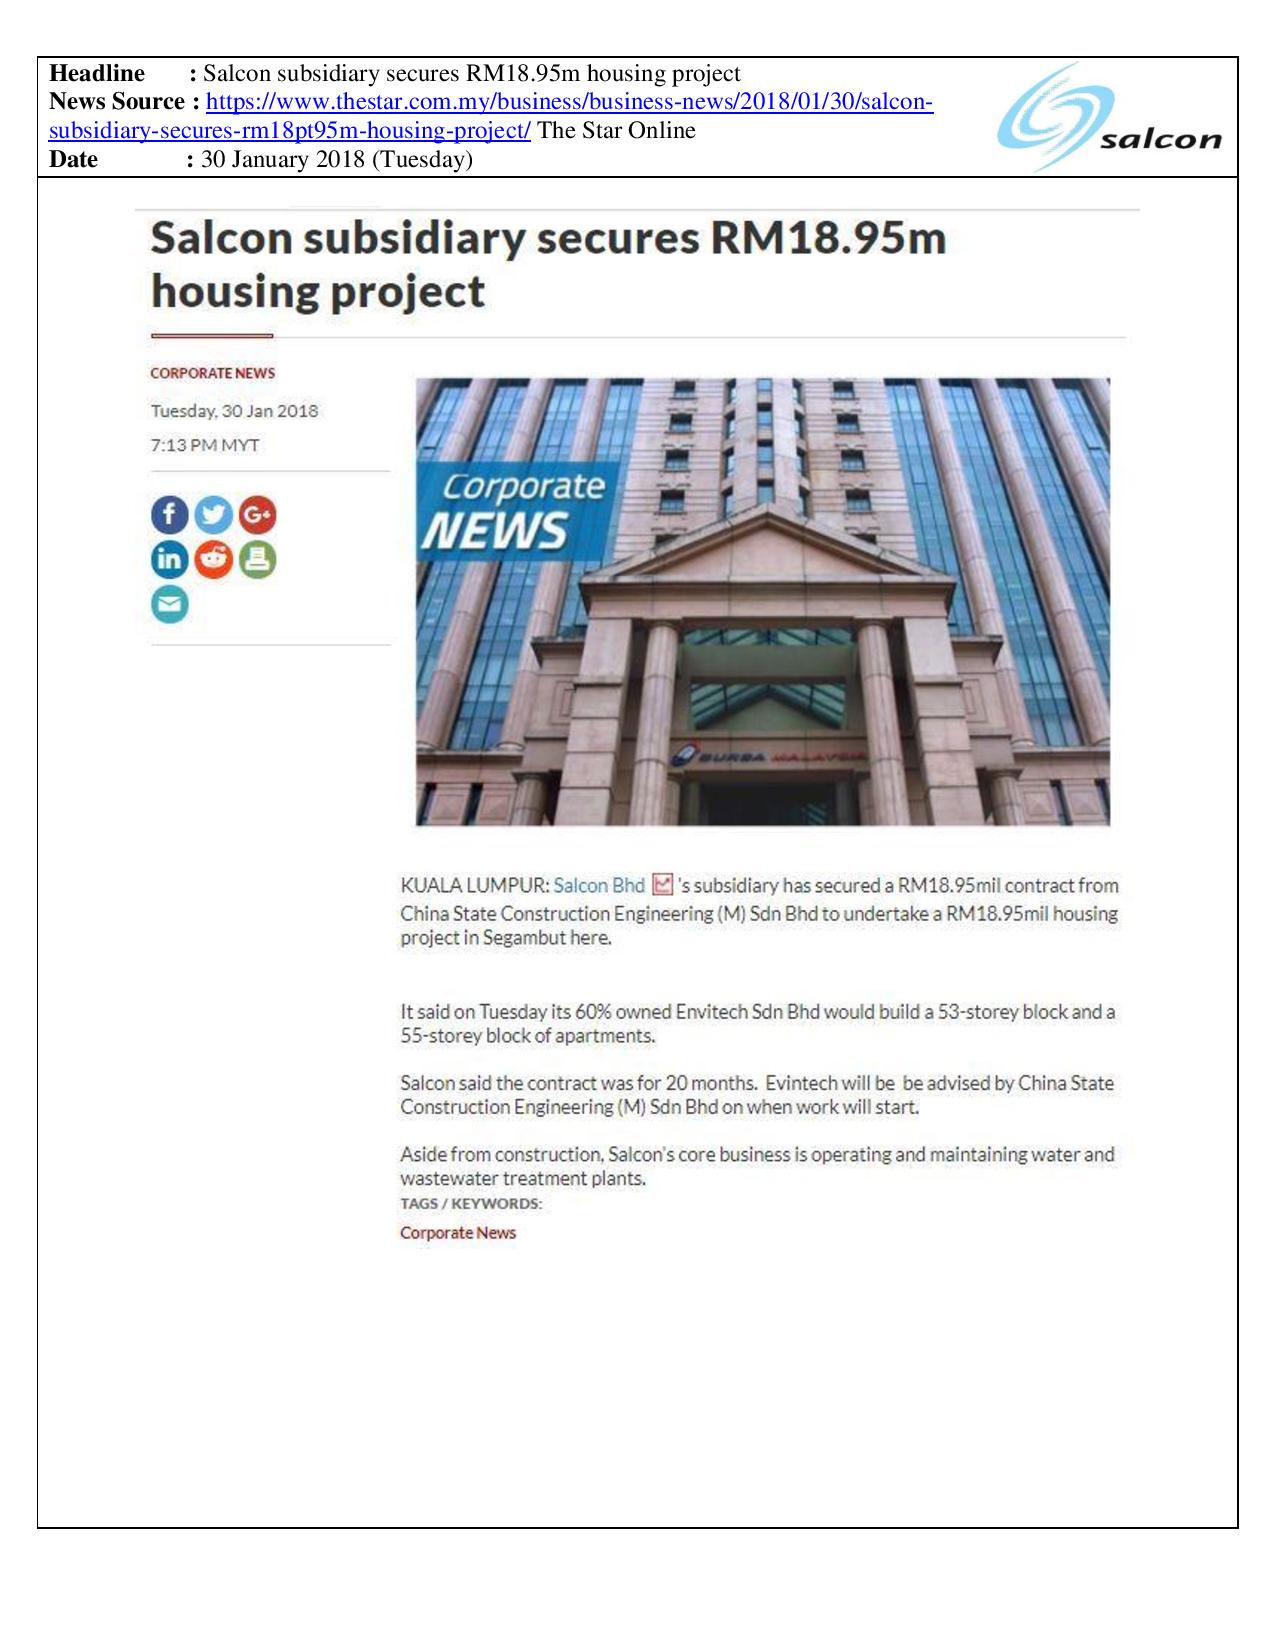 Salcon subsidiary secures RM18.95m housing project